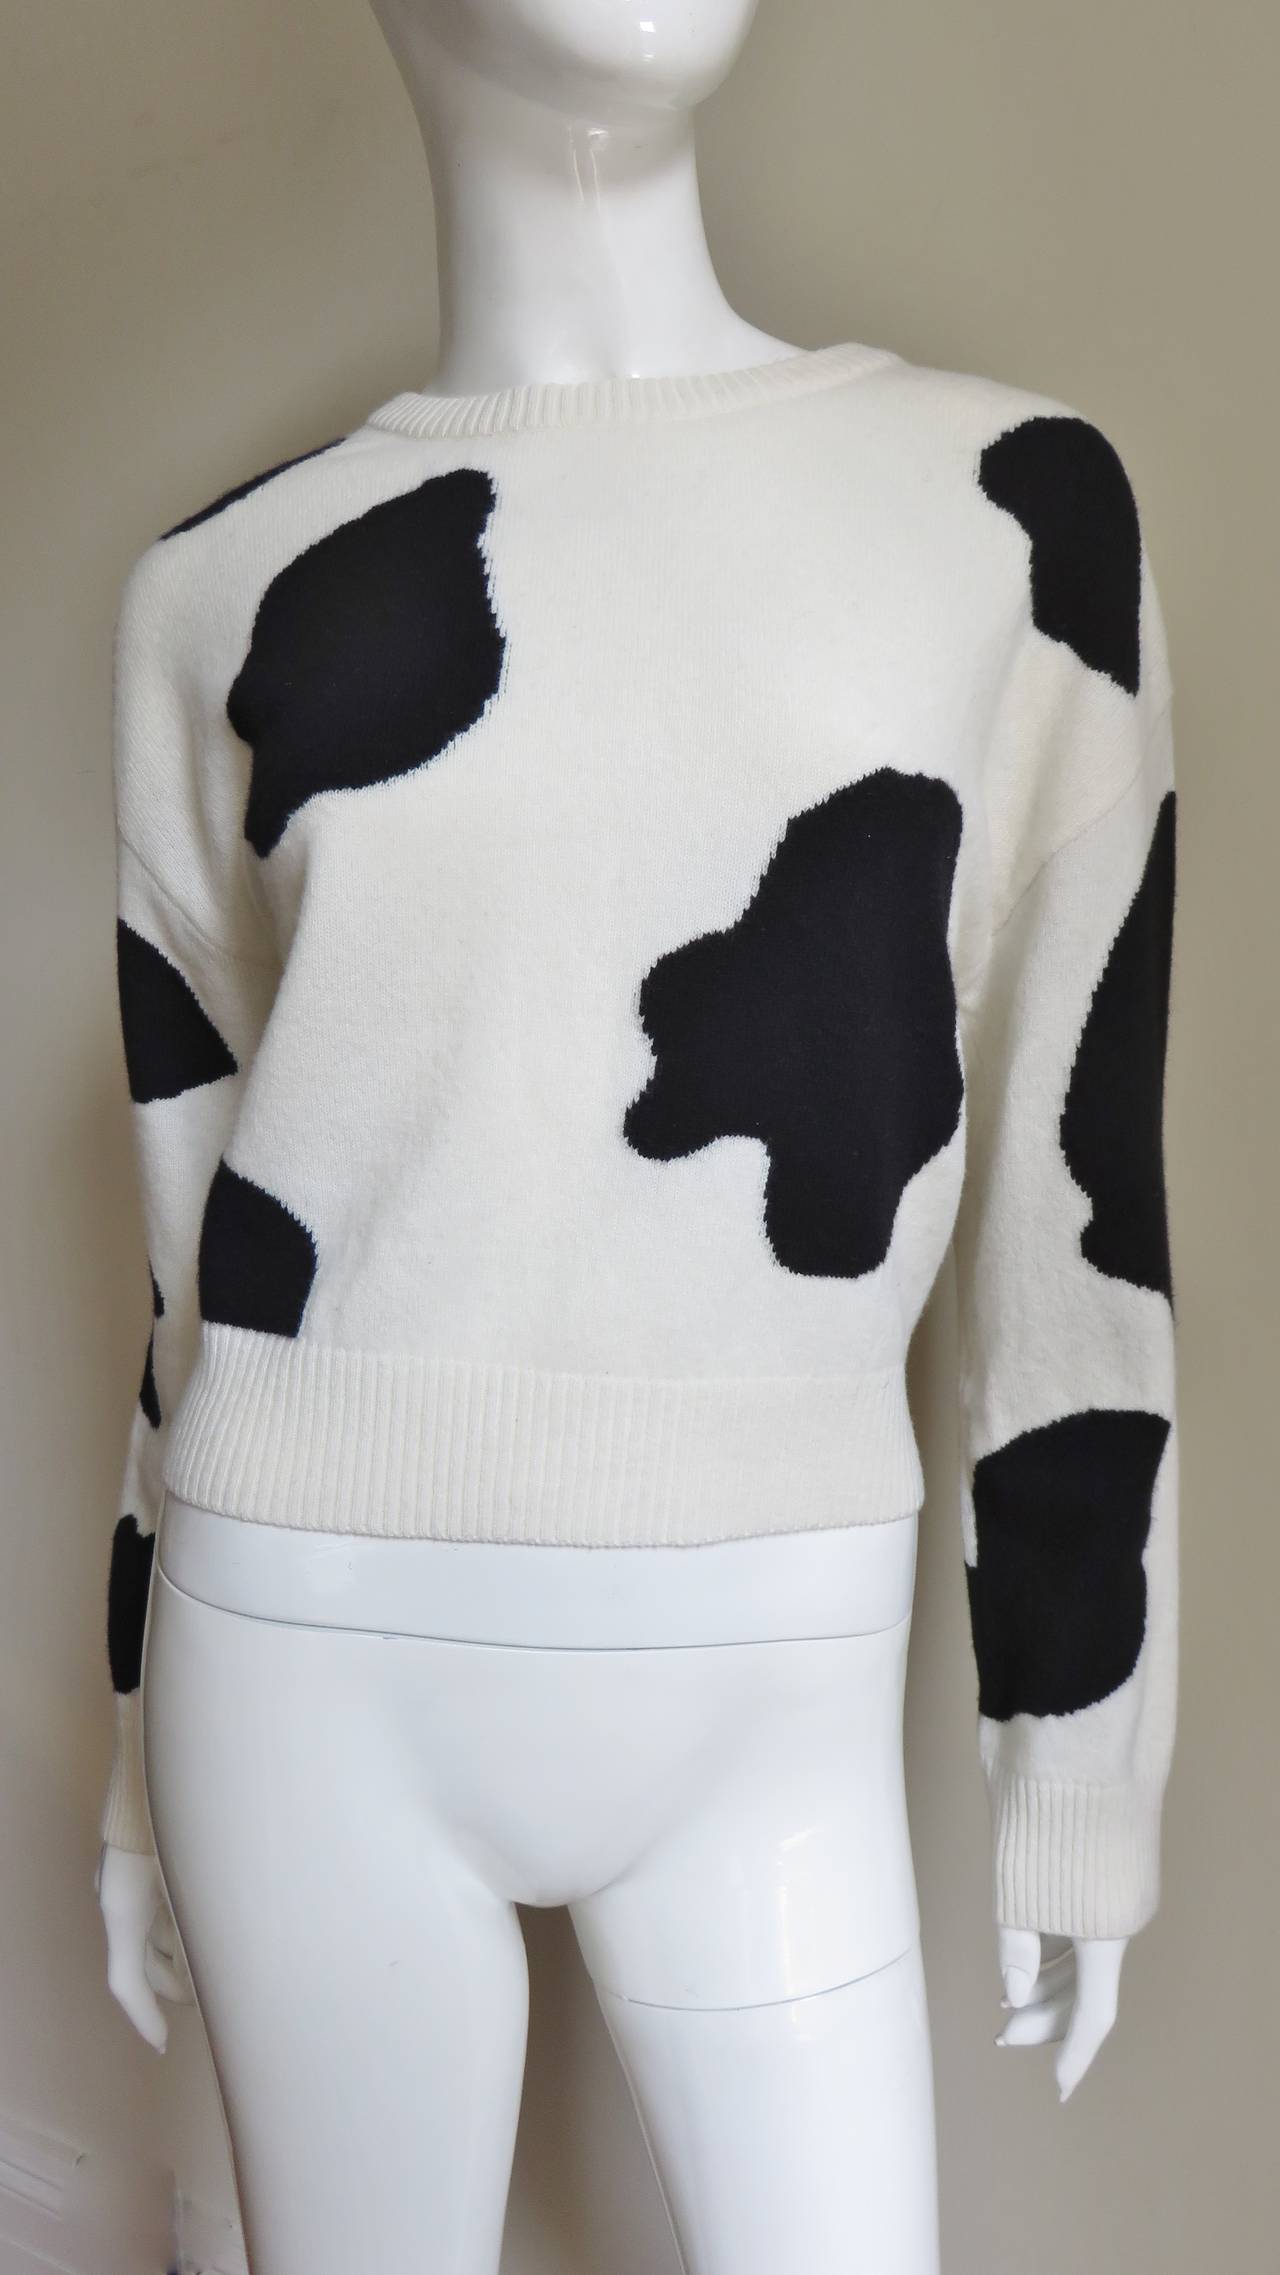 A fabulous whimsical off white and black cashmere sweater from Moschino Couture. It has long sleeves, a crew neckline and CASH COW emblazoned in gold capital letters individually appliqued onto the back of the cow hide pattern sweater.  It slips on